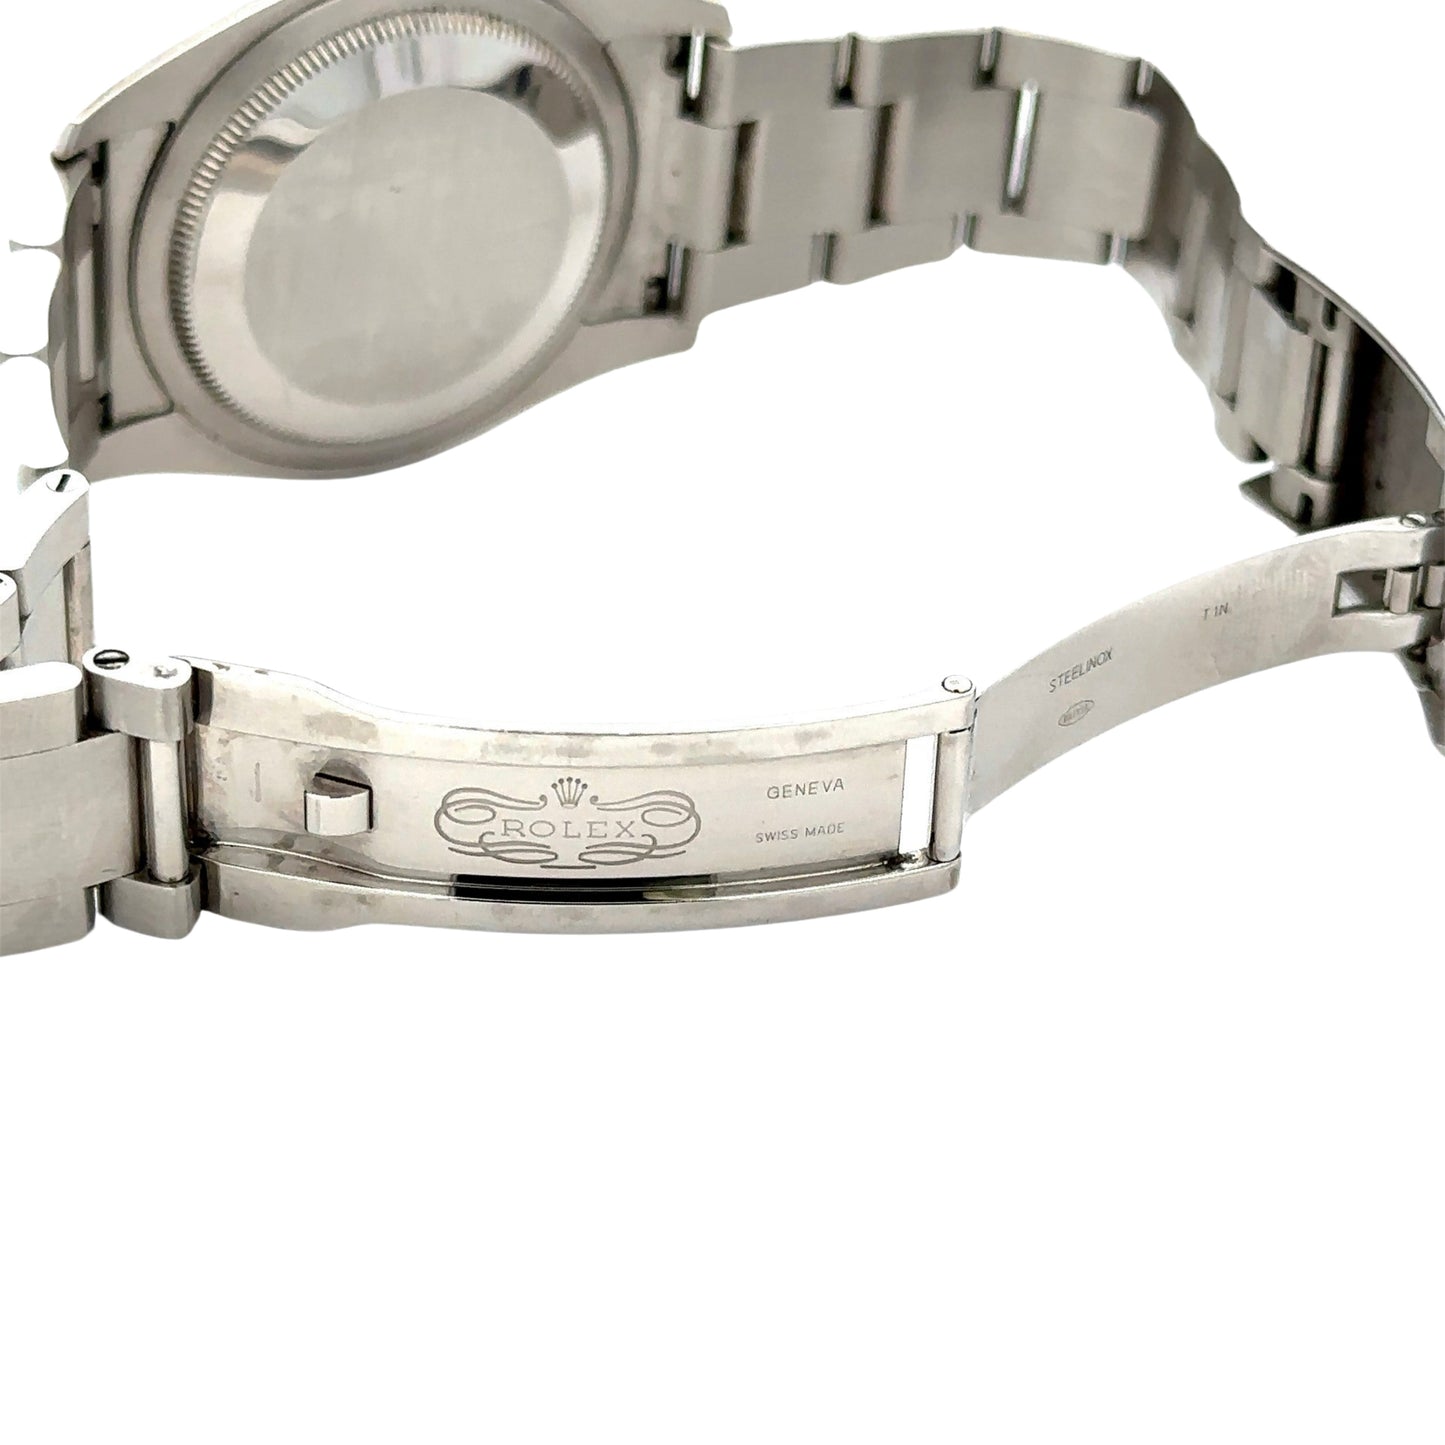 Rolex clasp bracelet with "Rolex" stamp and steelknox on band